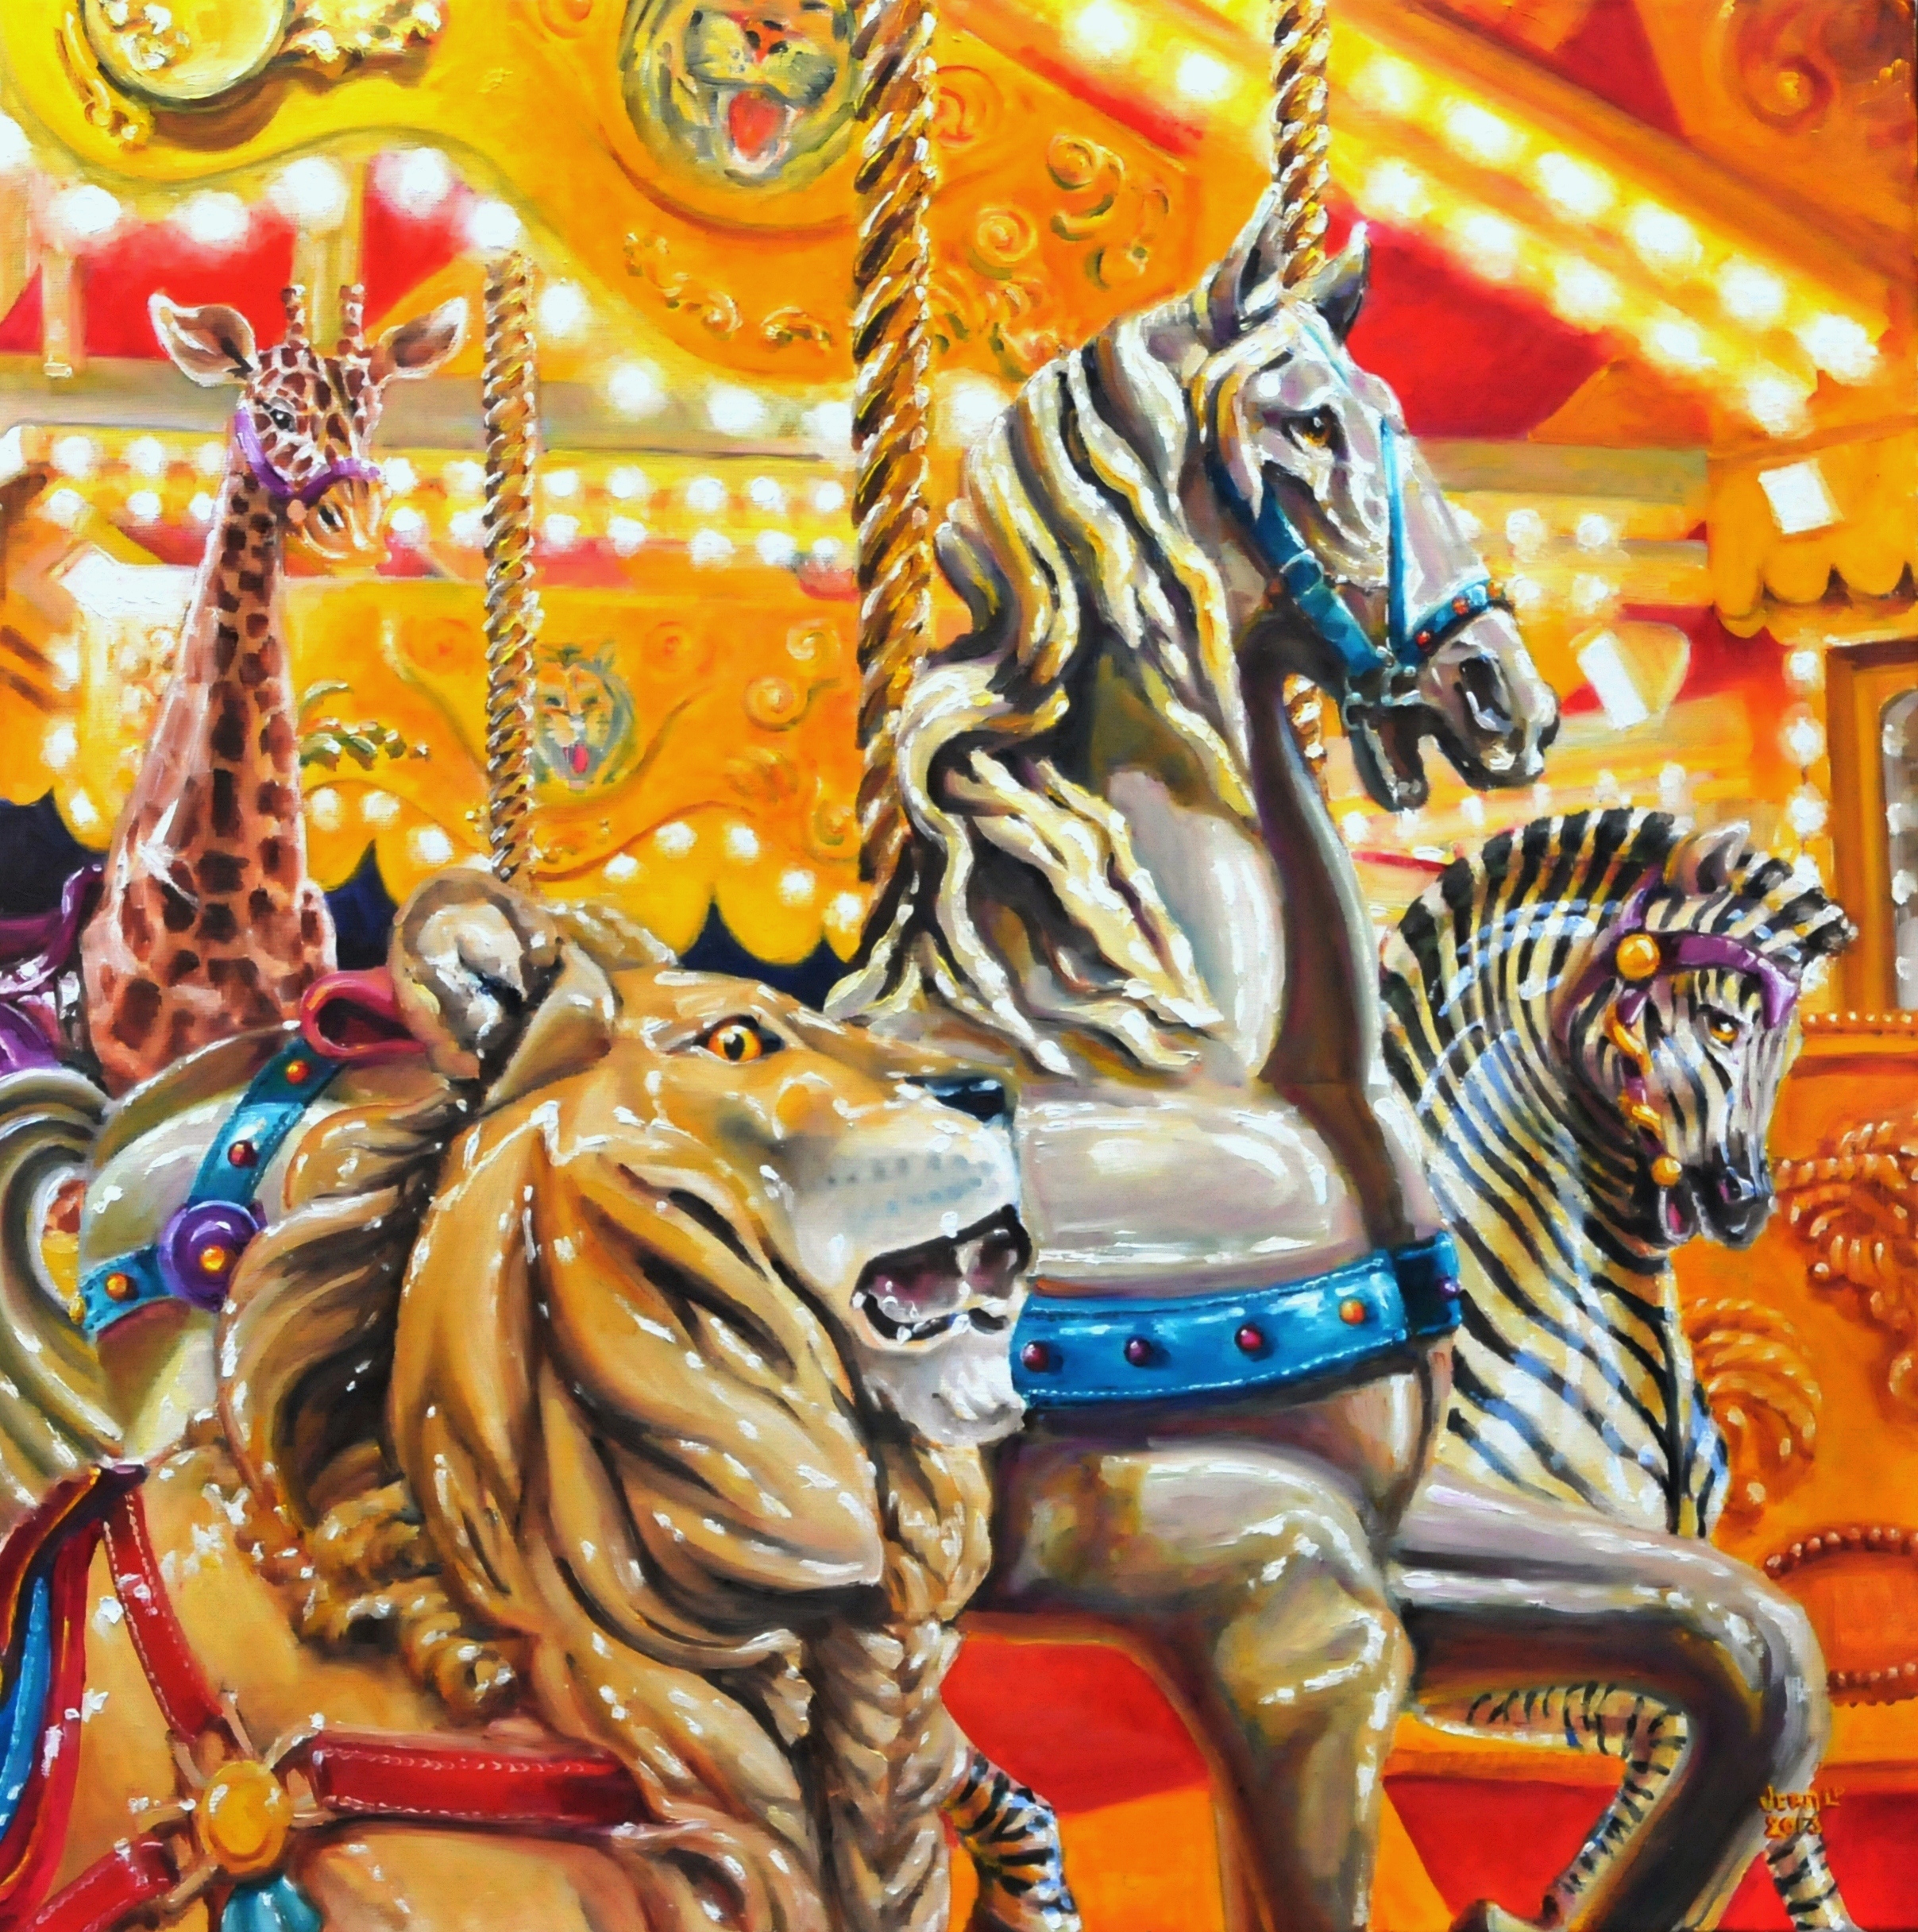 Carousel animals | Oil paint on linen | Year: 2013 | Dimensions: 80x80cm